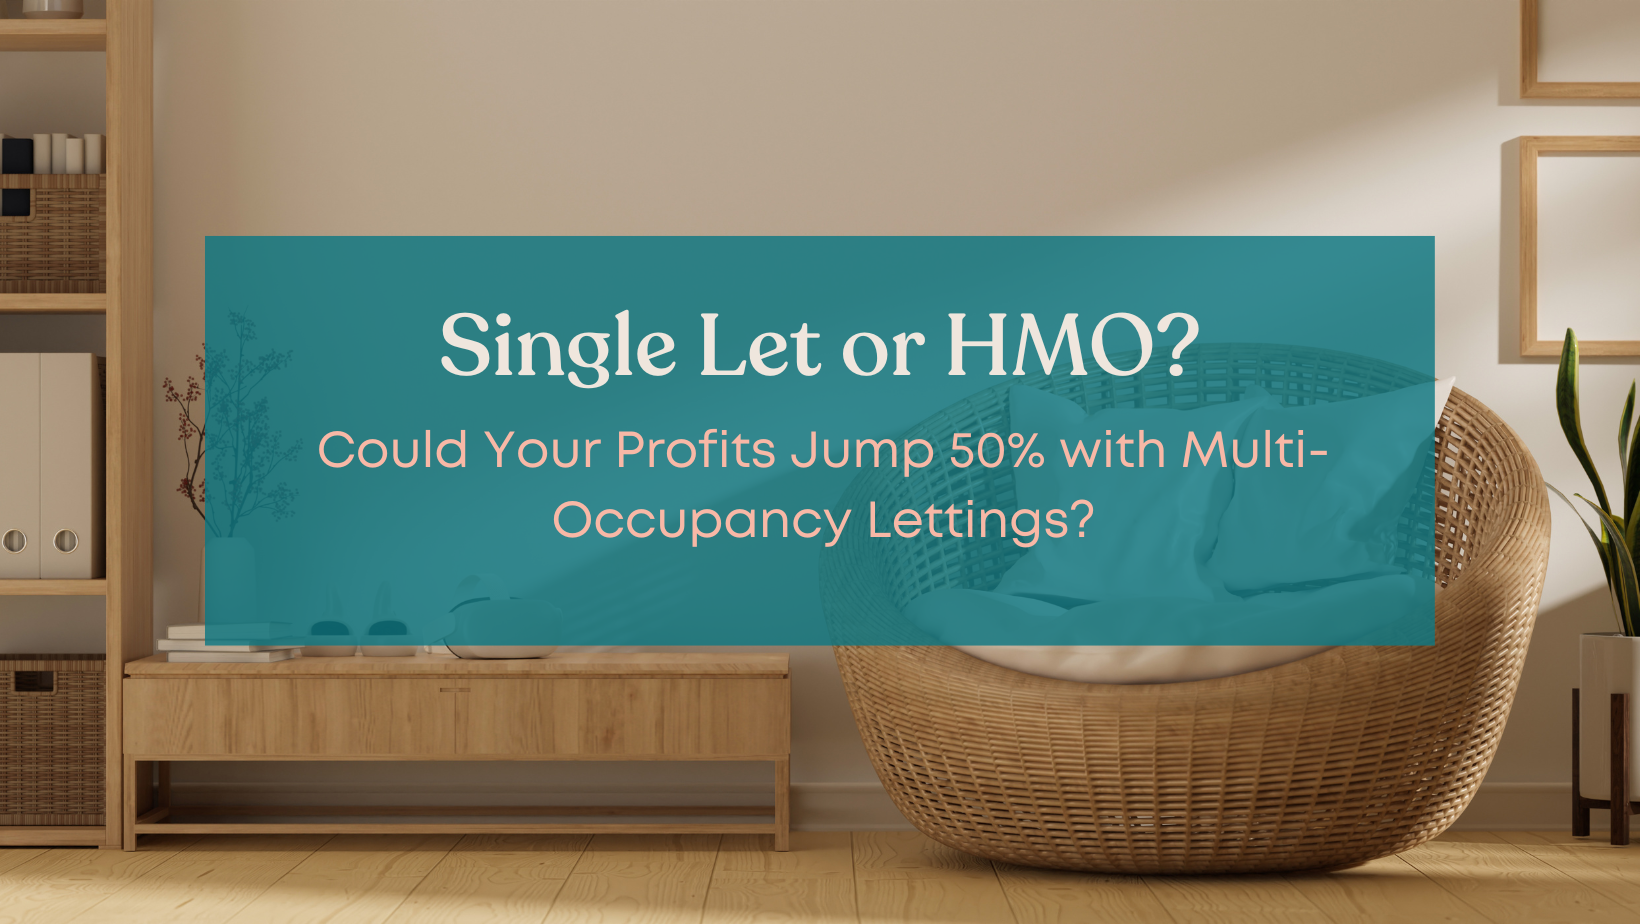 How to choose between a single let or HMO